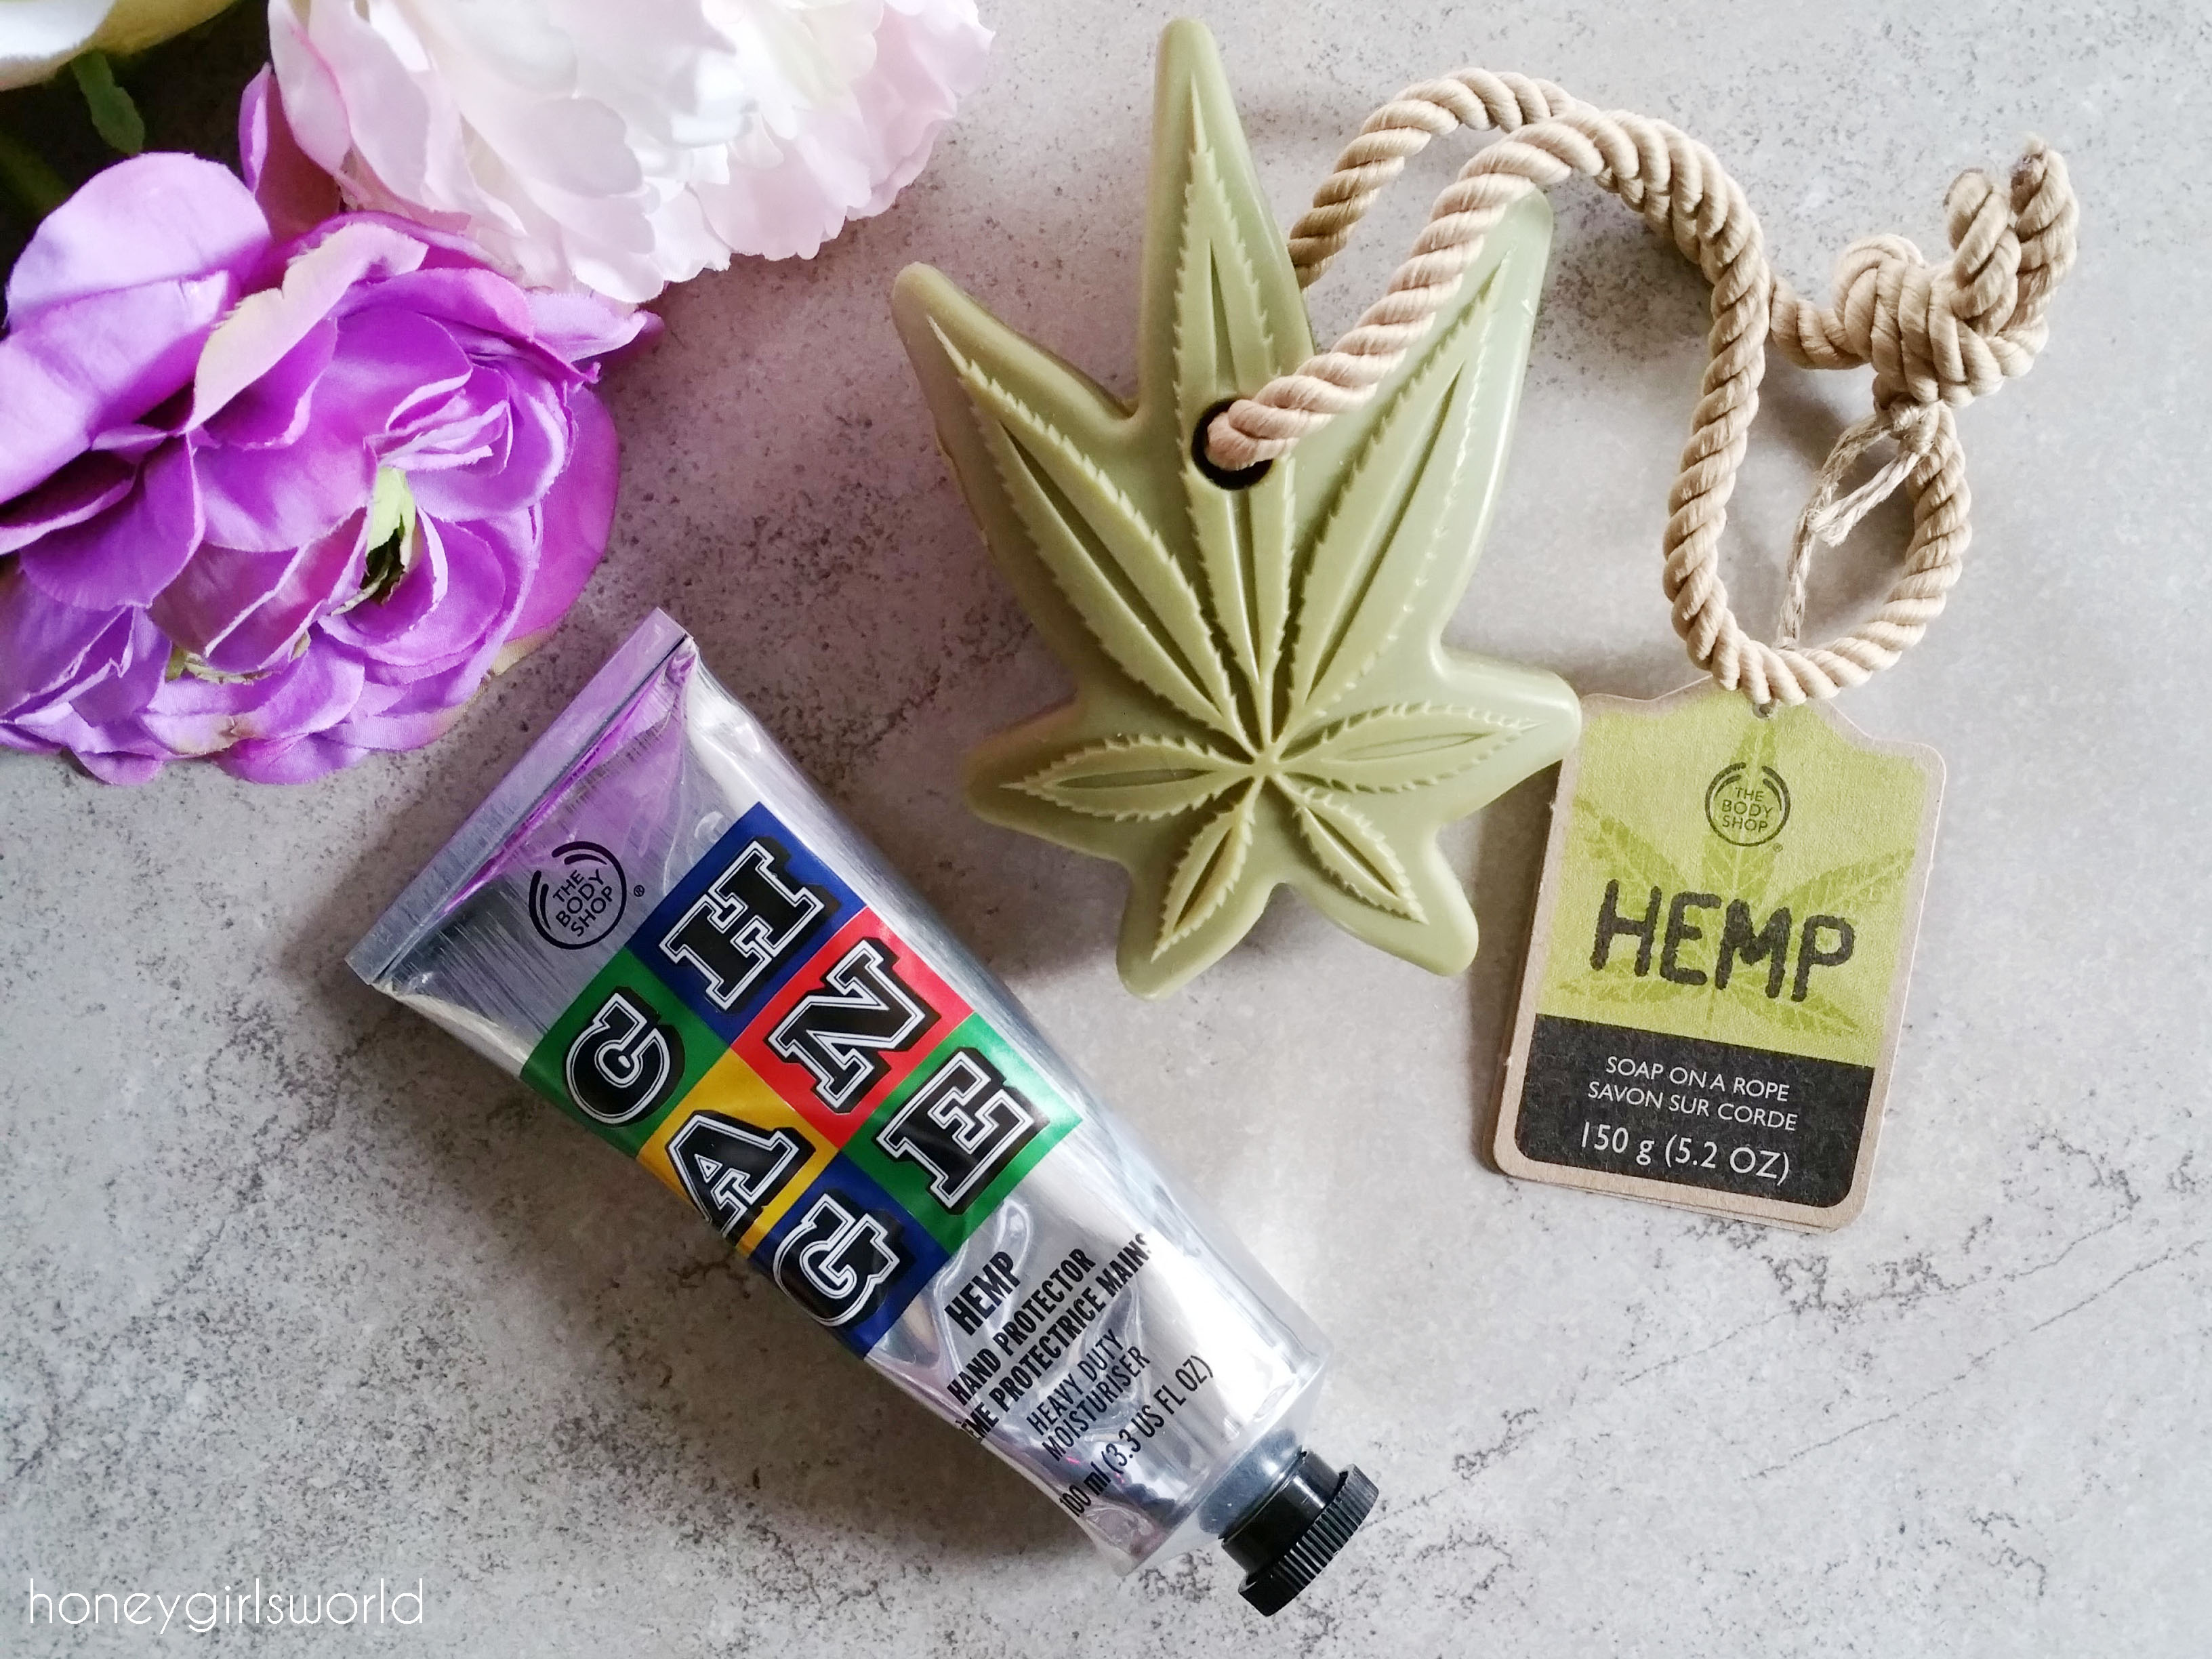 hemp hand protector, the body shop, hemp hand, protector, hand cream, lotion, body care, skin care, hemp products, hemp soap on a rope, beauty, review, enrich not exploit,